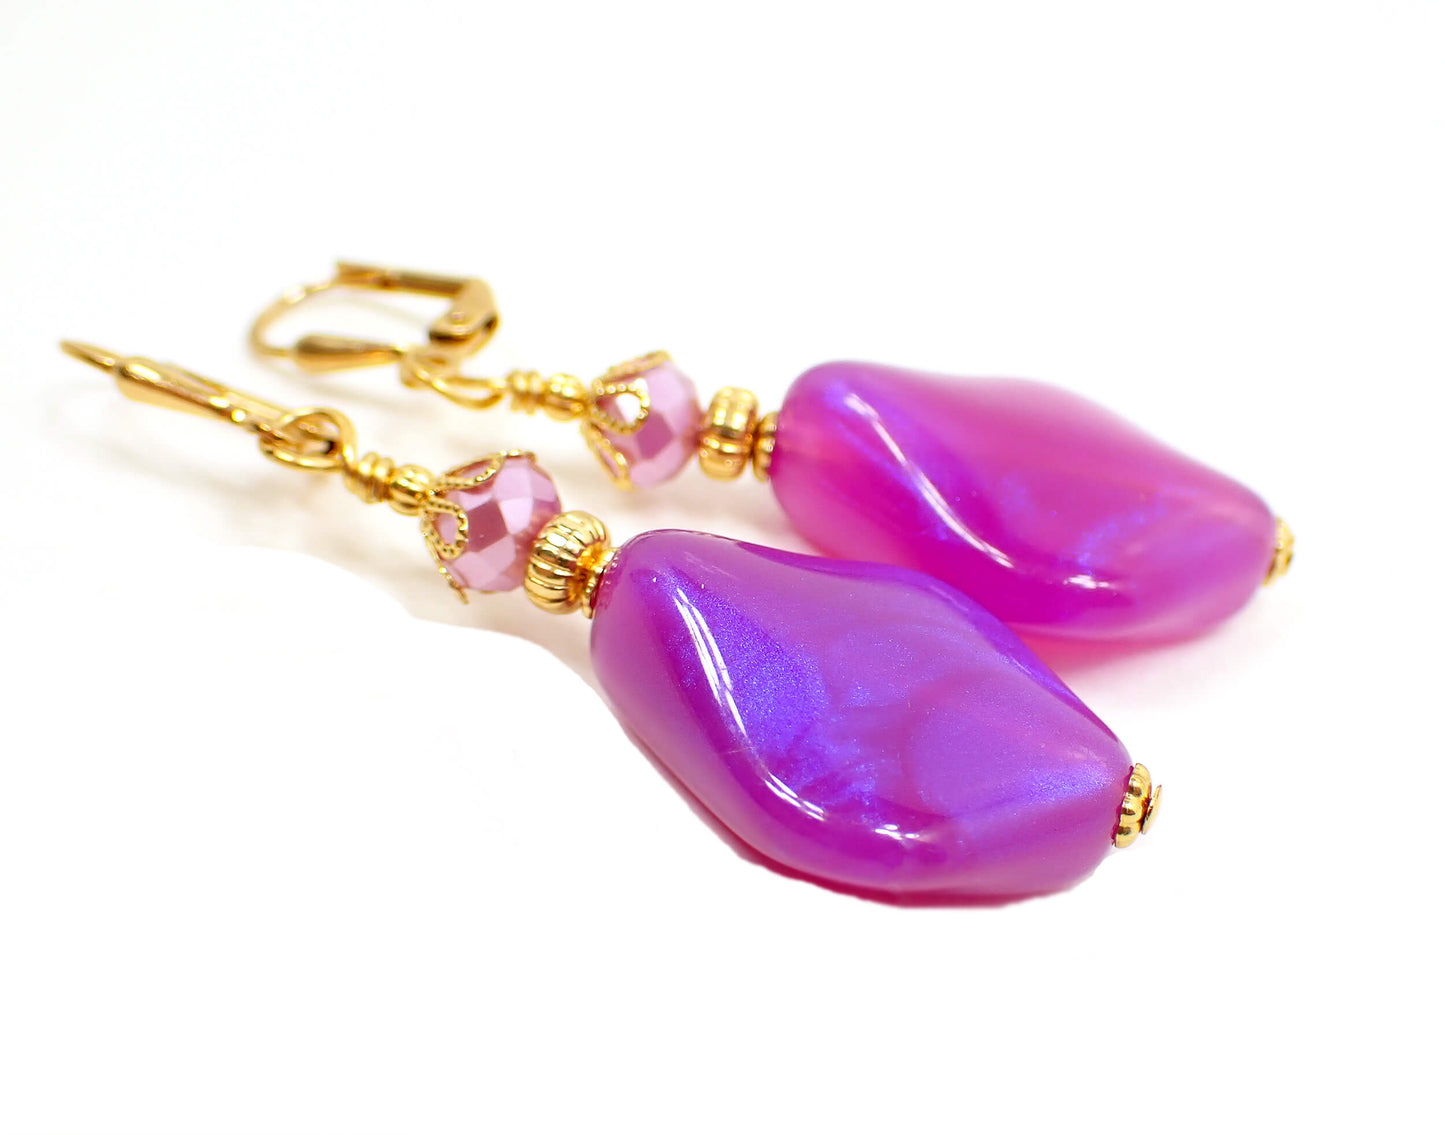 Handmade Color Shift Purple Lucite Earrings Gold Plated Hook Lever Back or Clip On